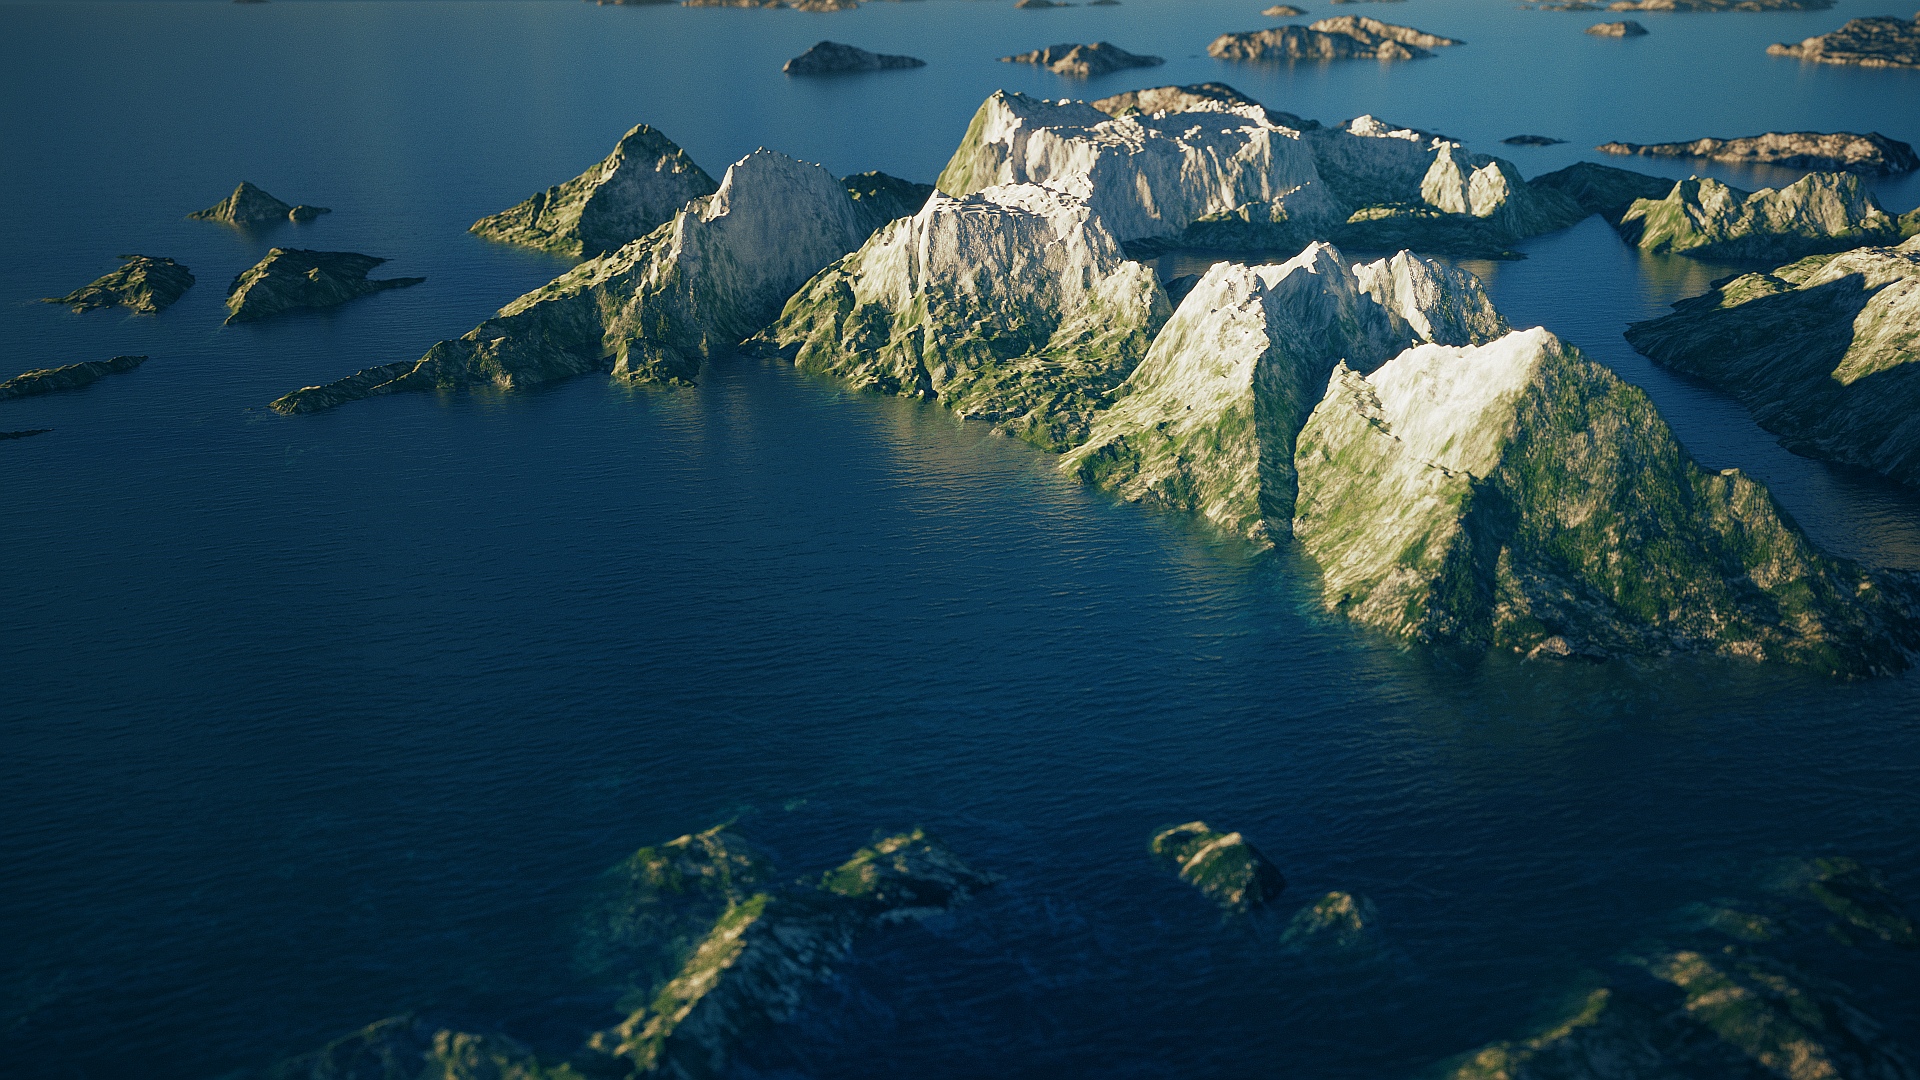 The mountains render